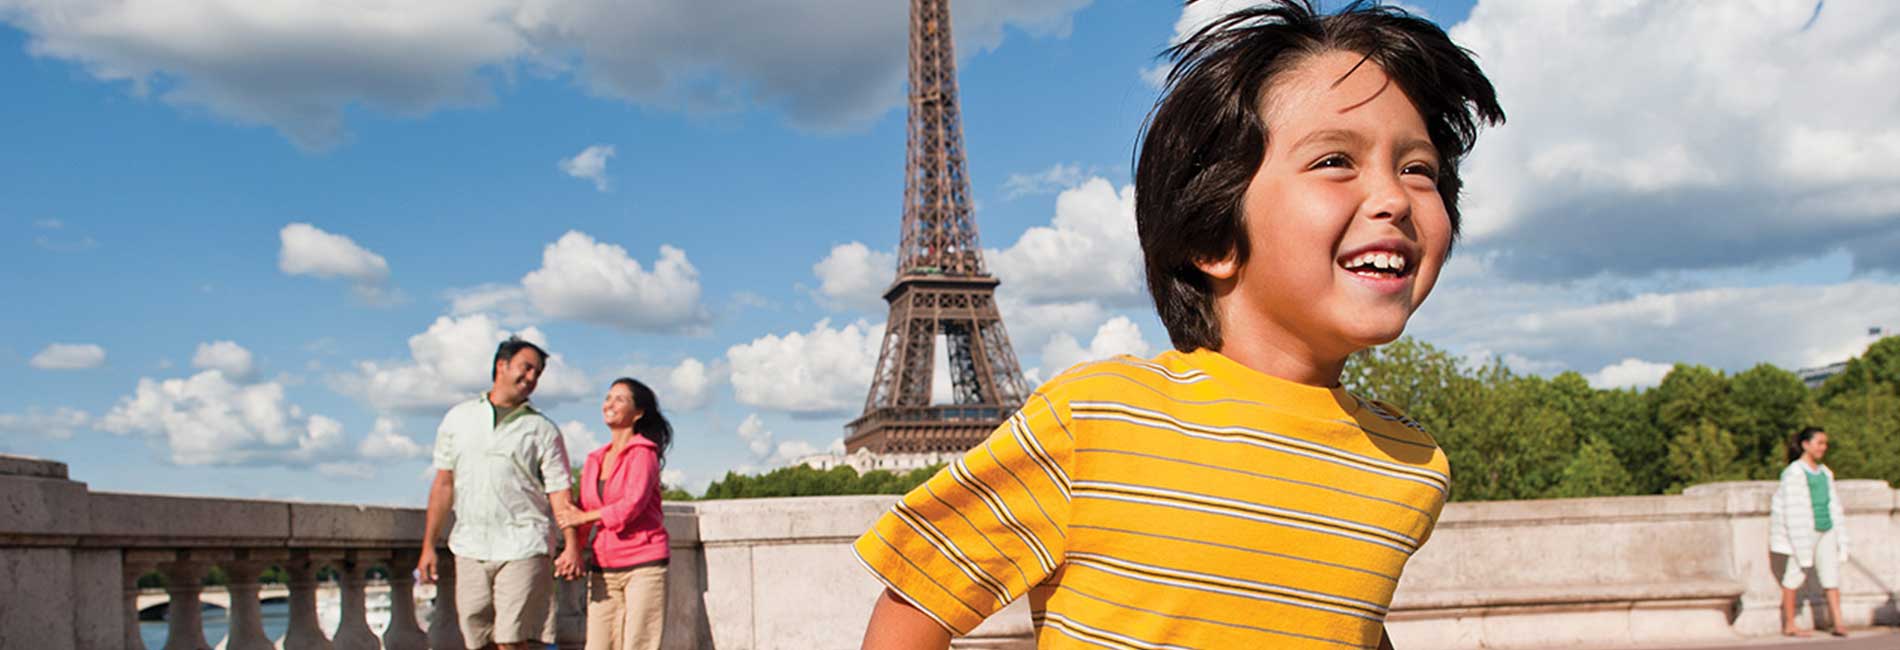 Little boy running in front of the Eiffel Tower in Paris, France